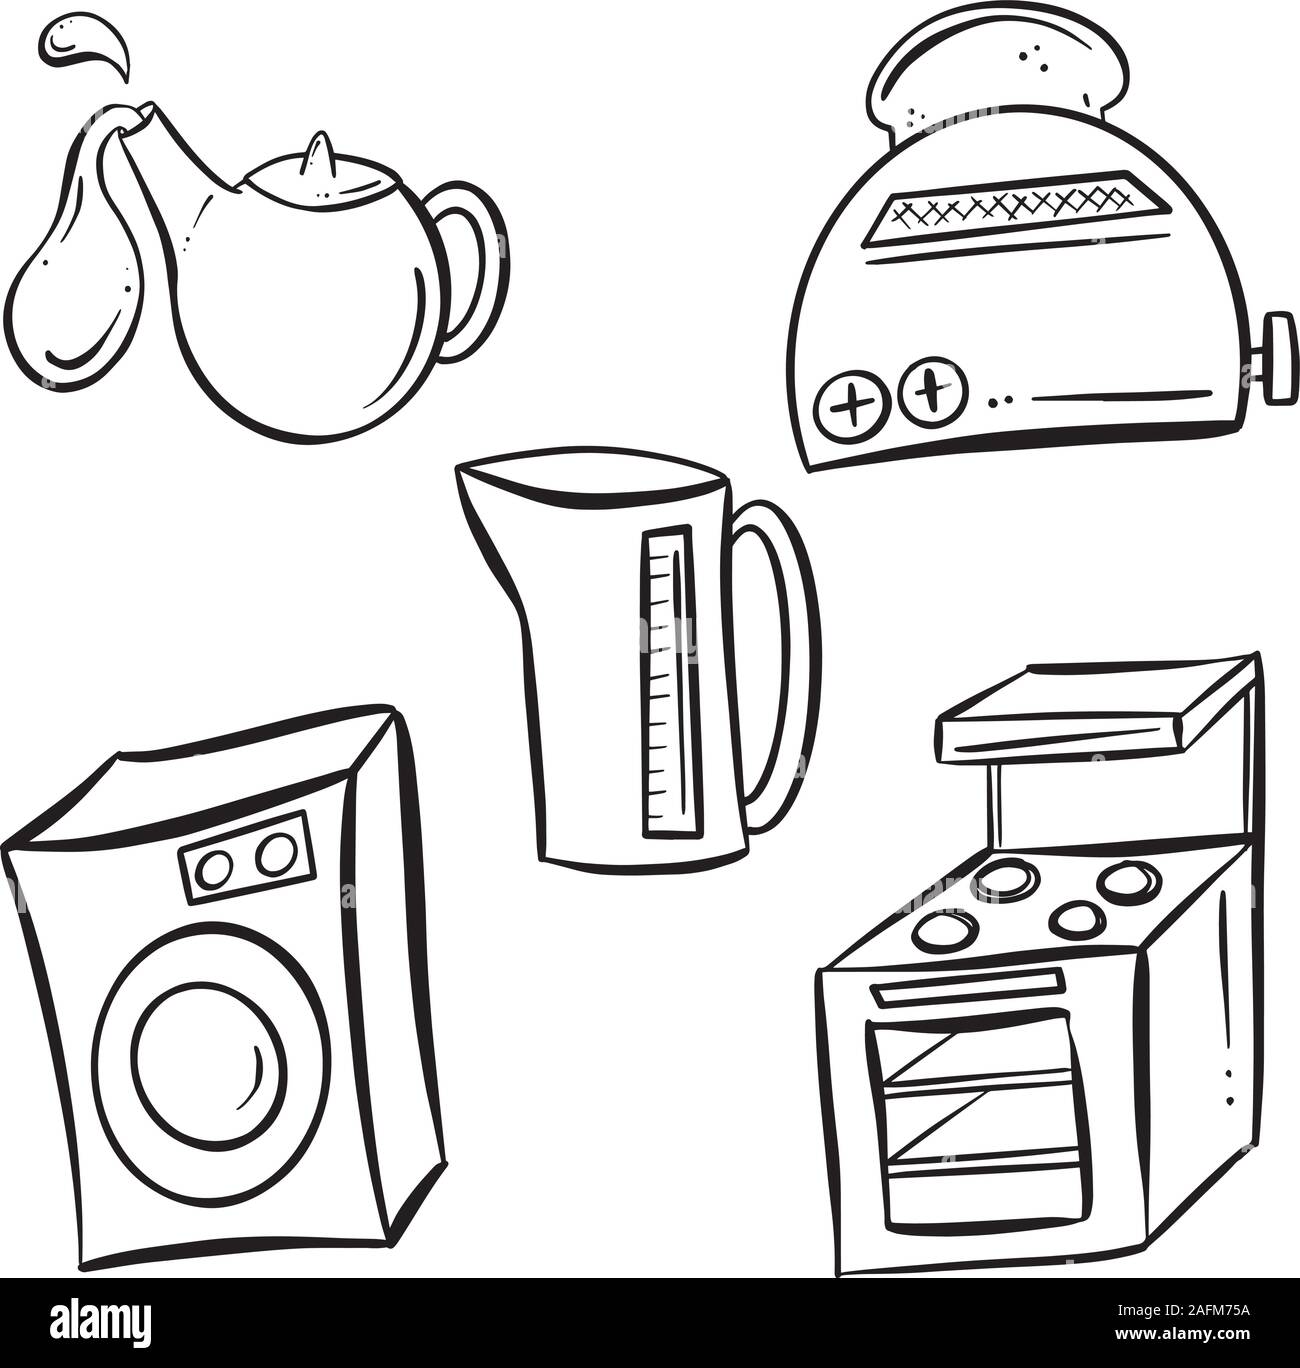 Collection of Cartoon Kitchen Appliances Logo Vectors of Cooker, Kettle, Toaster and Washing Machine Stock Vector